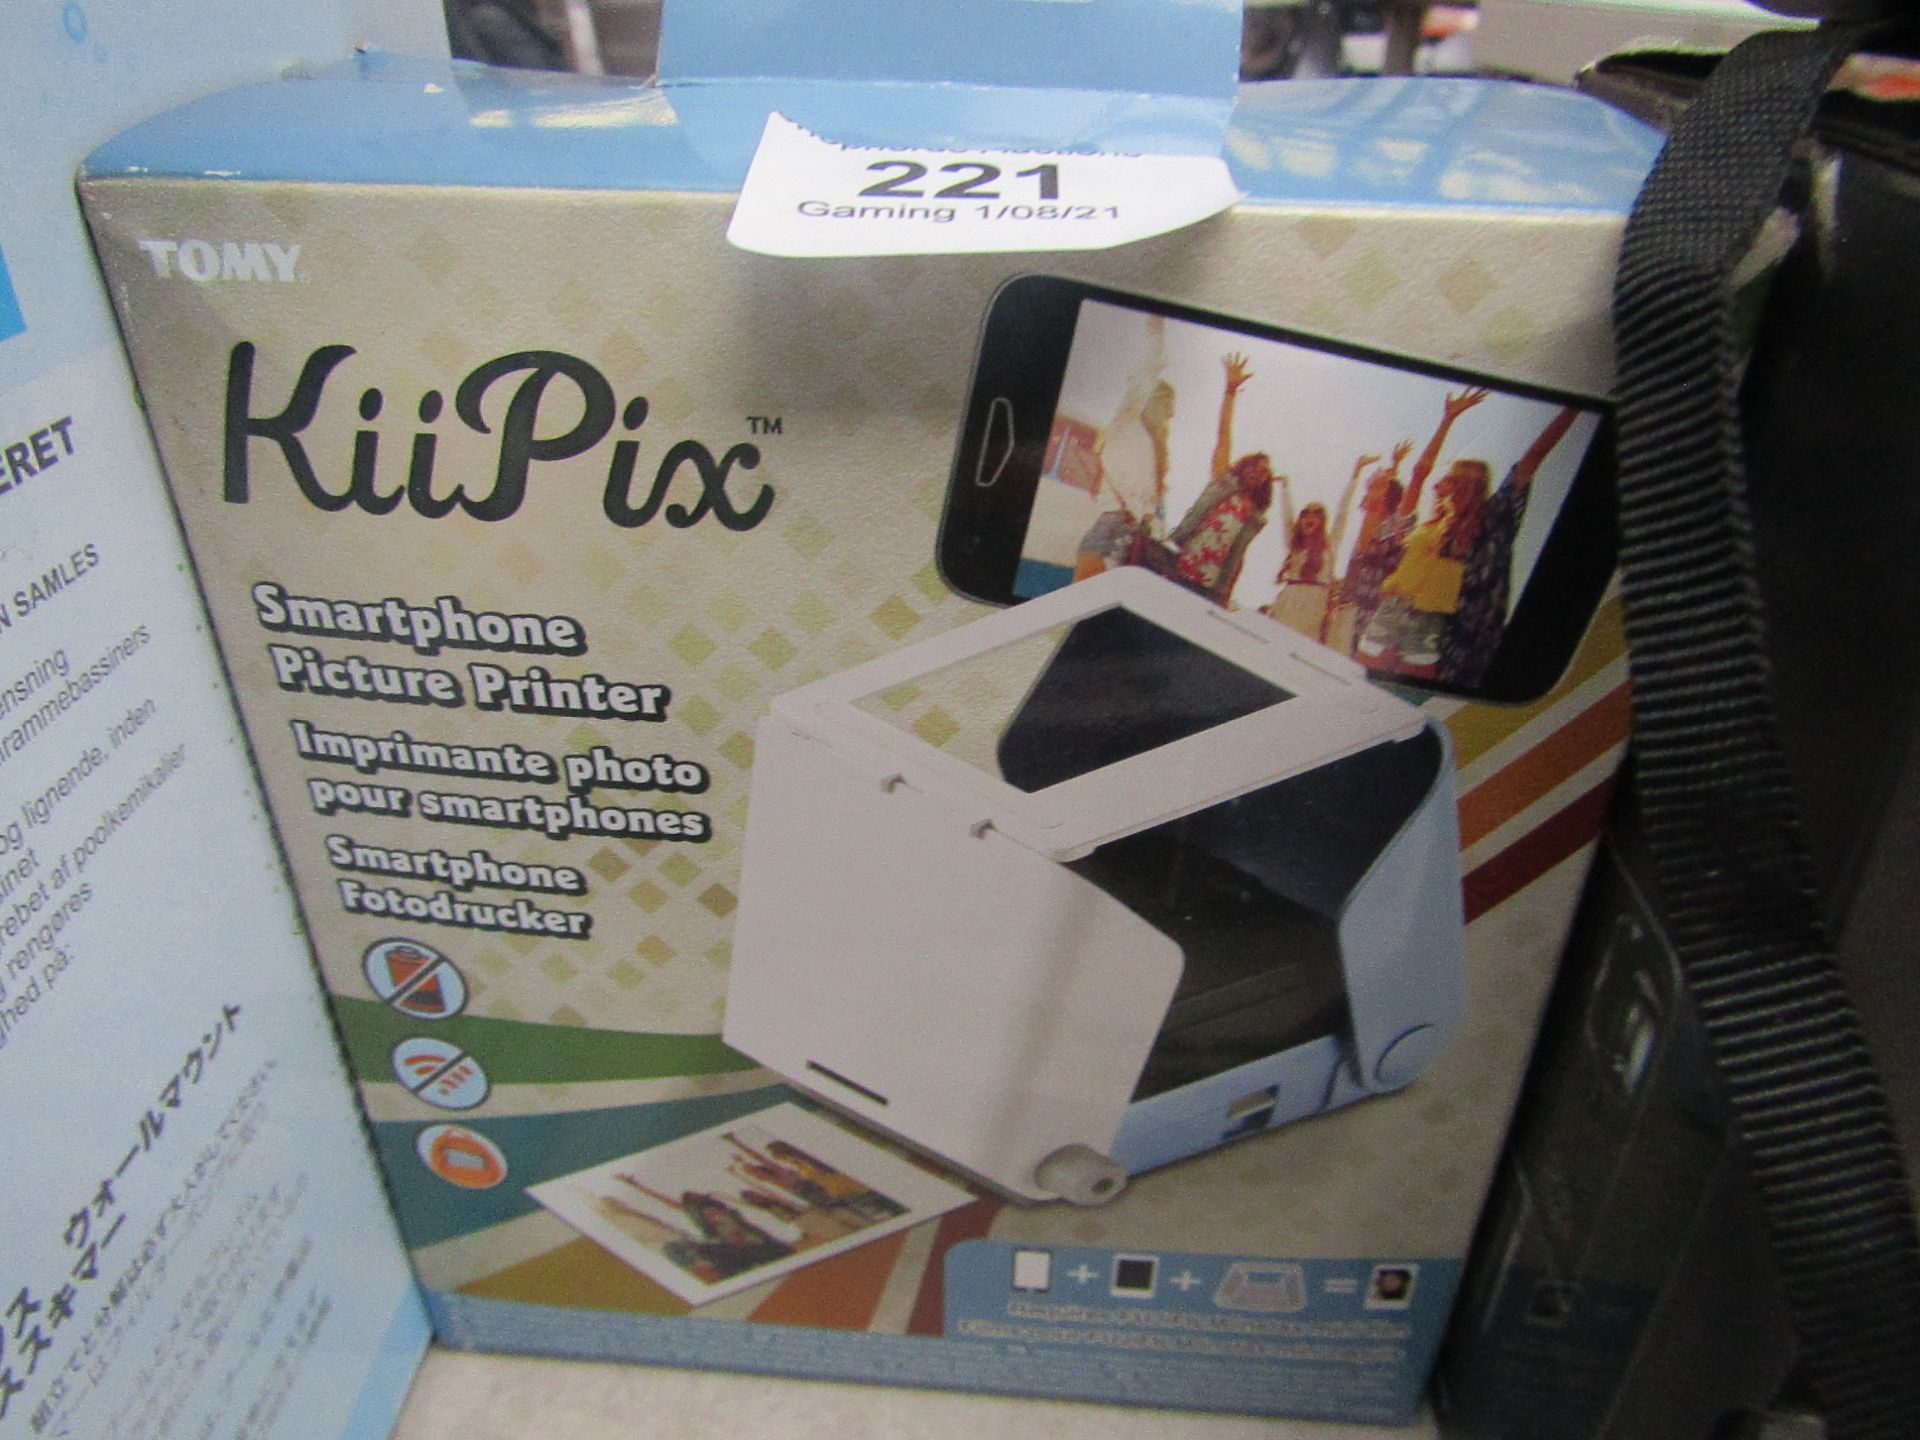 Tomy Kii Pix Smartphone Picture Printer - Untested & boxed - RRP £40